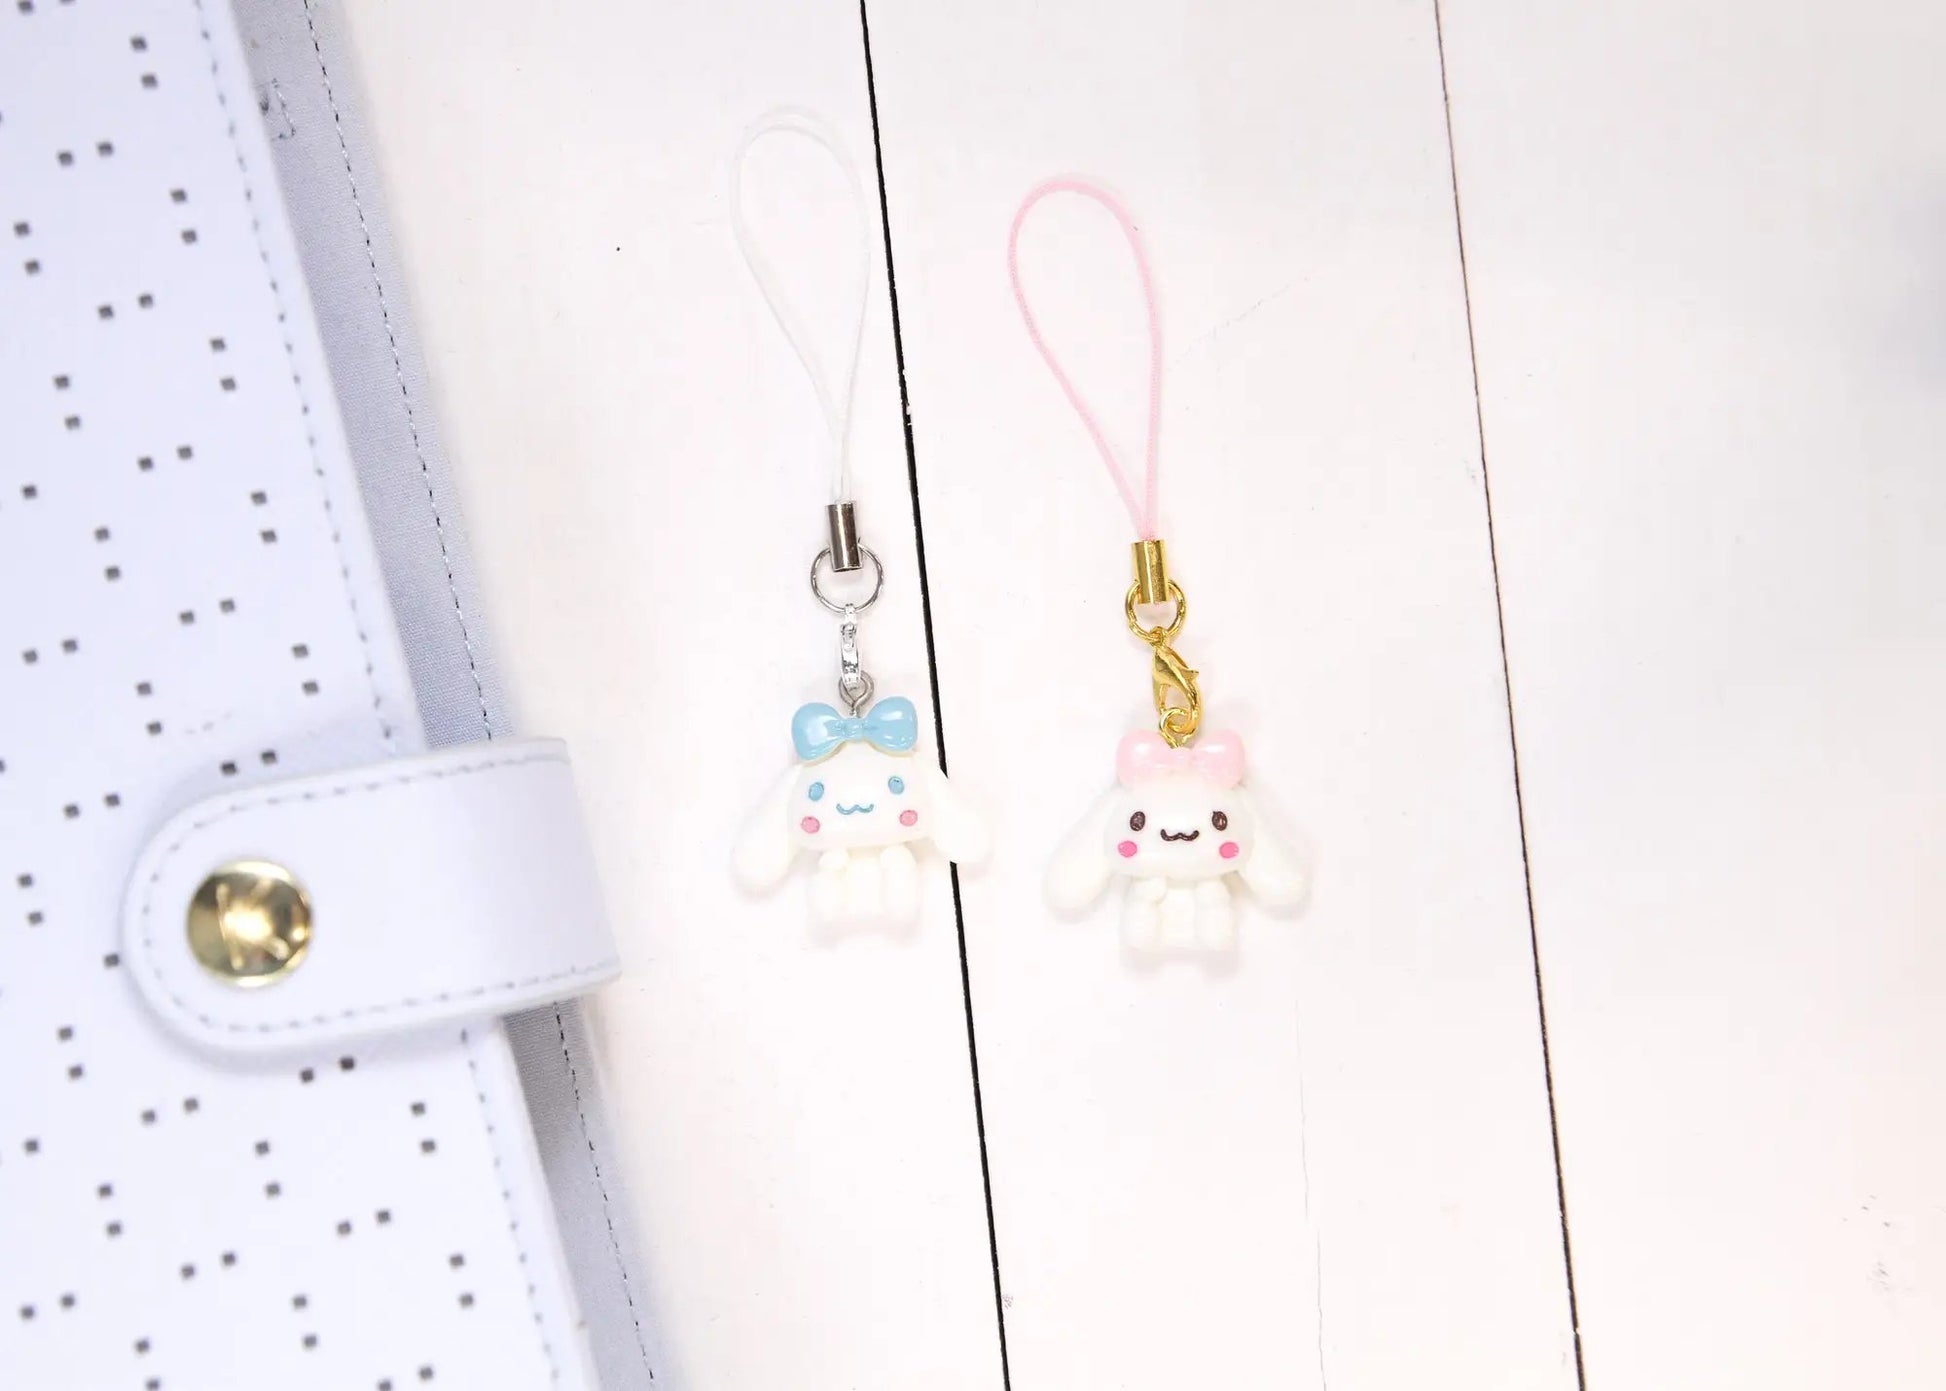 a couple of small key chains hanging from a wall